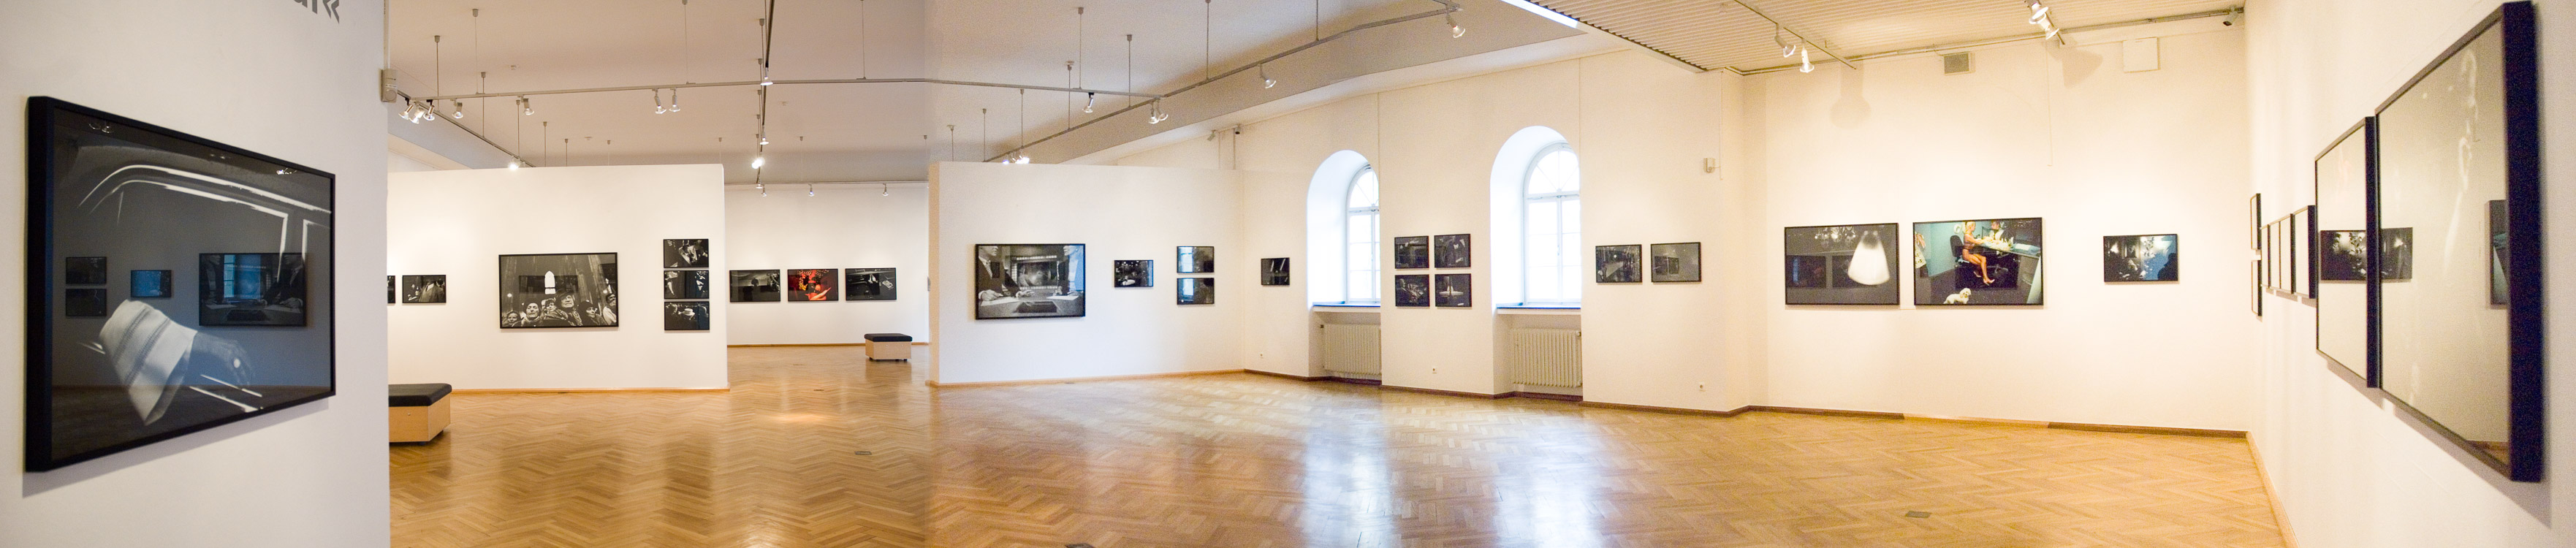 Exhibition in Stadtmuseum Köln – Installation Power and Ritual – documentary photography